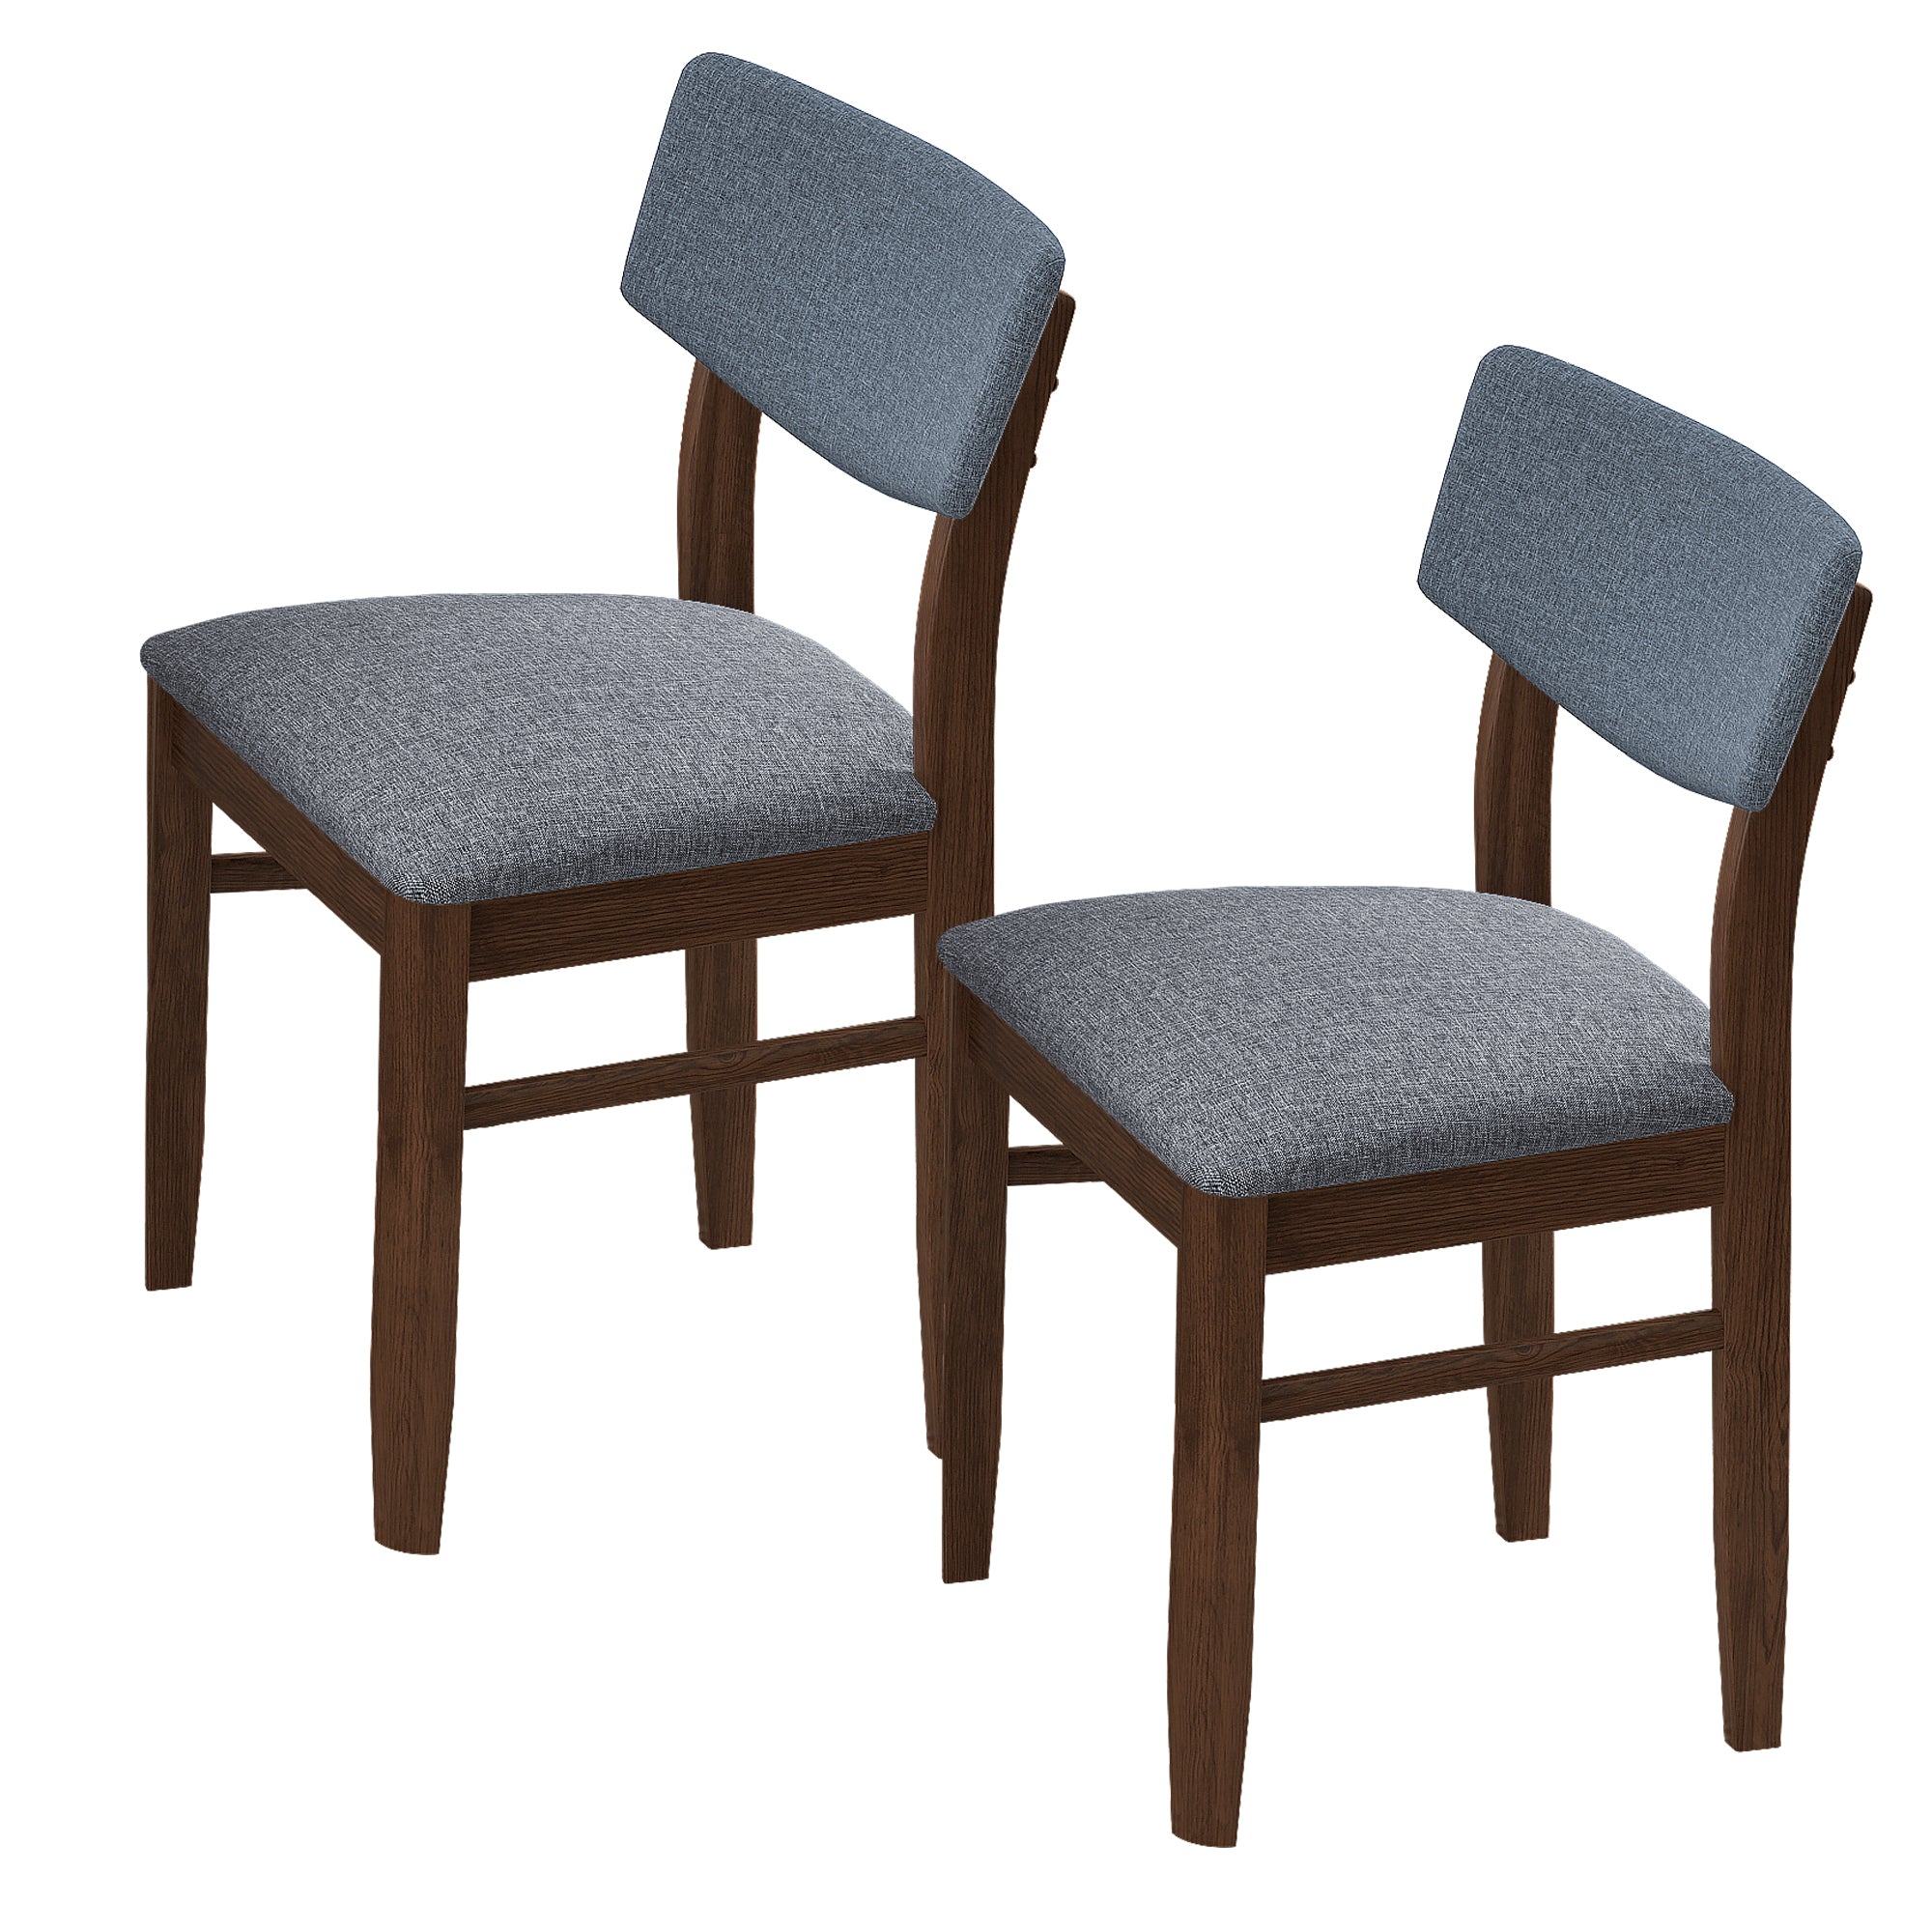 2 PCS Dining Chairs Fabric Cushion Retro Upholstered walnut-rubber wood